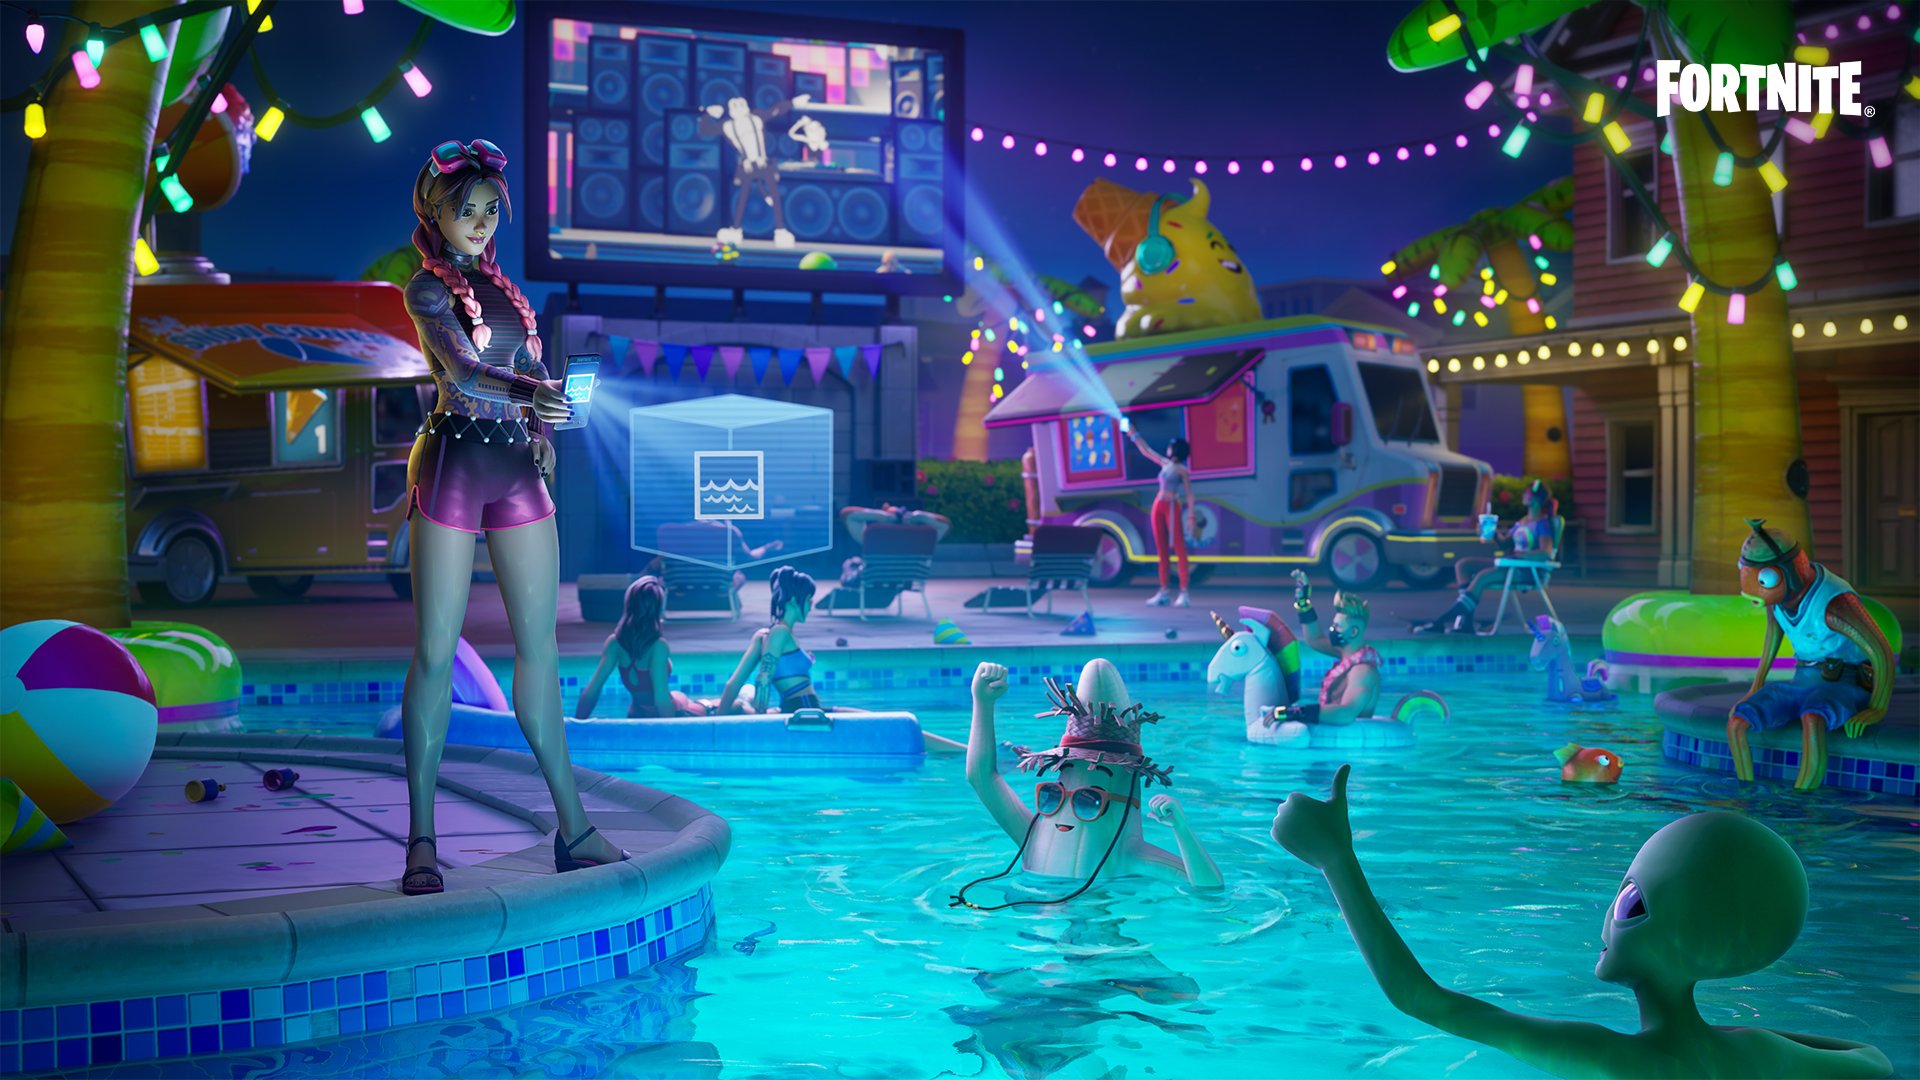 A bunch of fortnite characters hanging out in a pool, using the creative interface